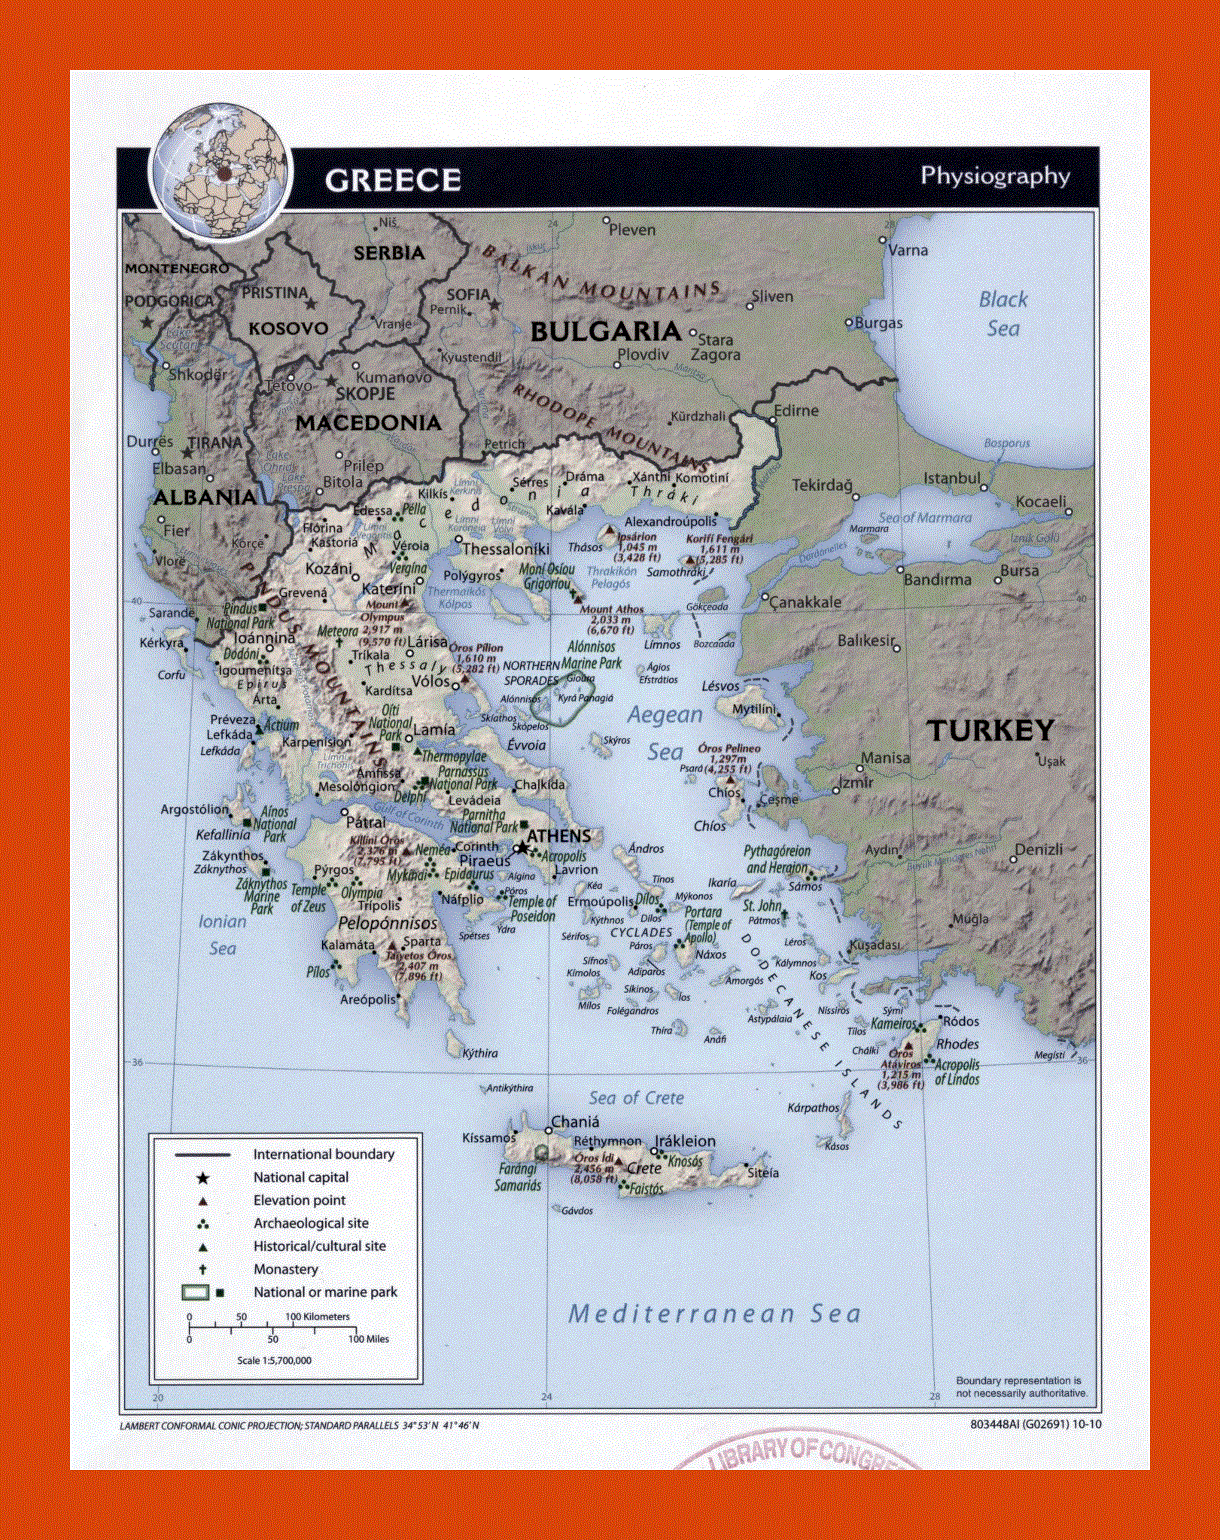 Physiography map of Greece - 2010